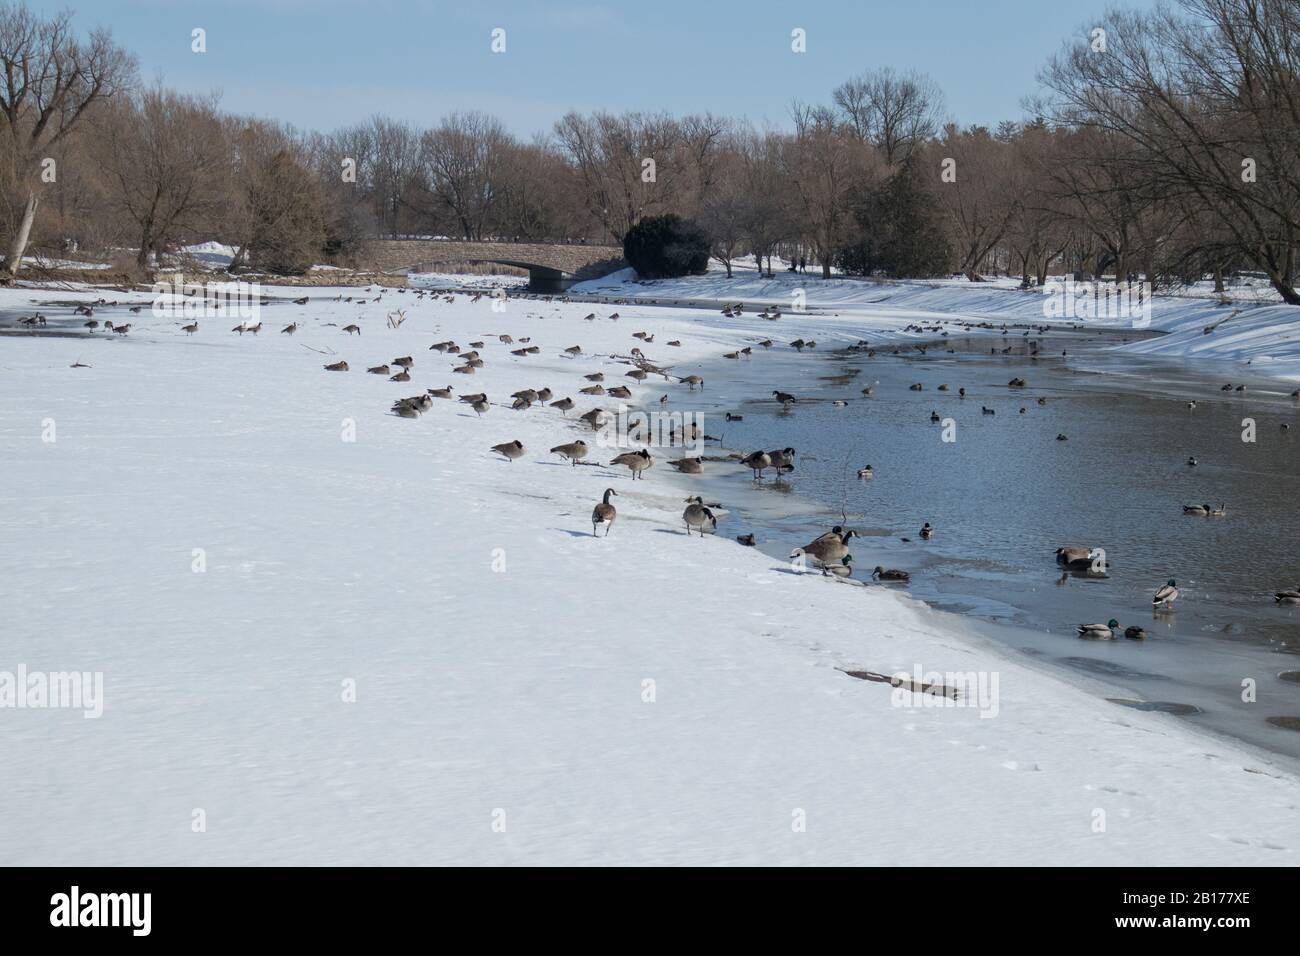 Canadian geese at Avon River during winter, Stratford, Ontario, Canada. Stock Photo